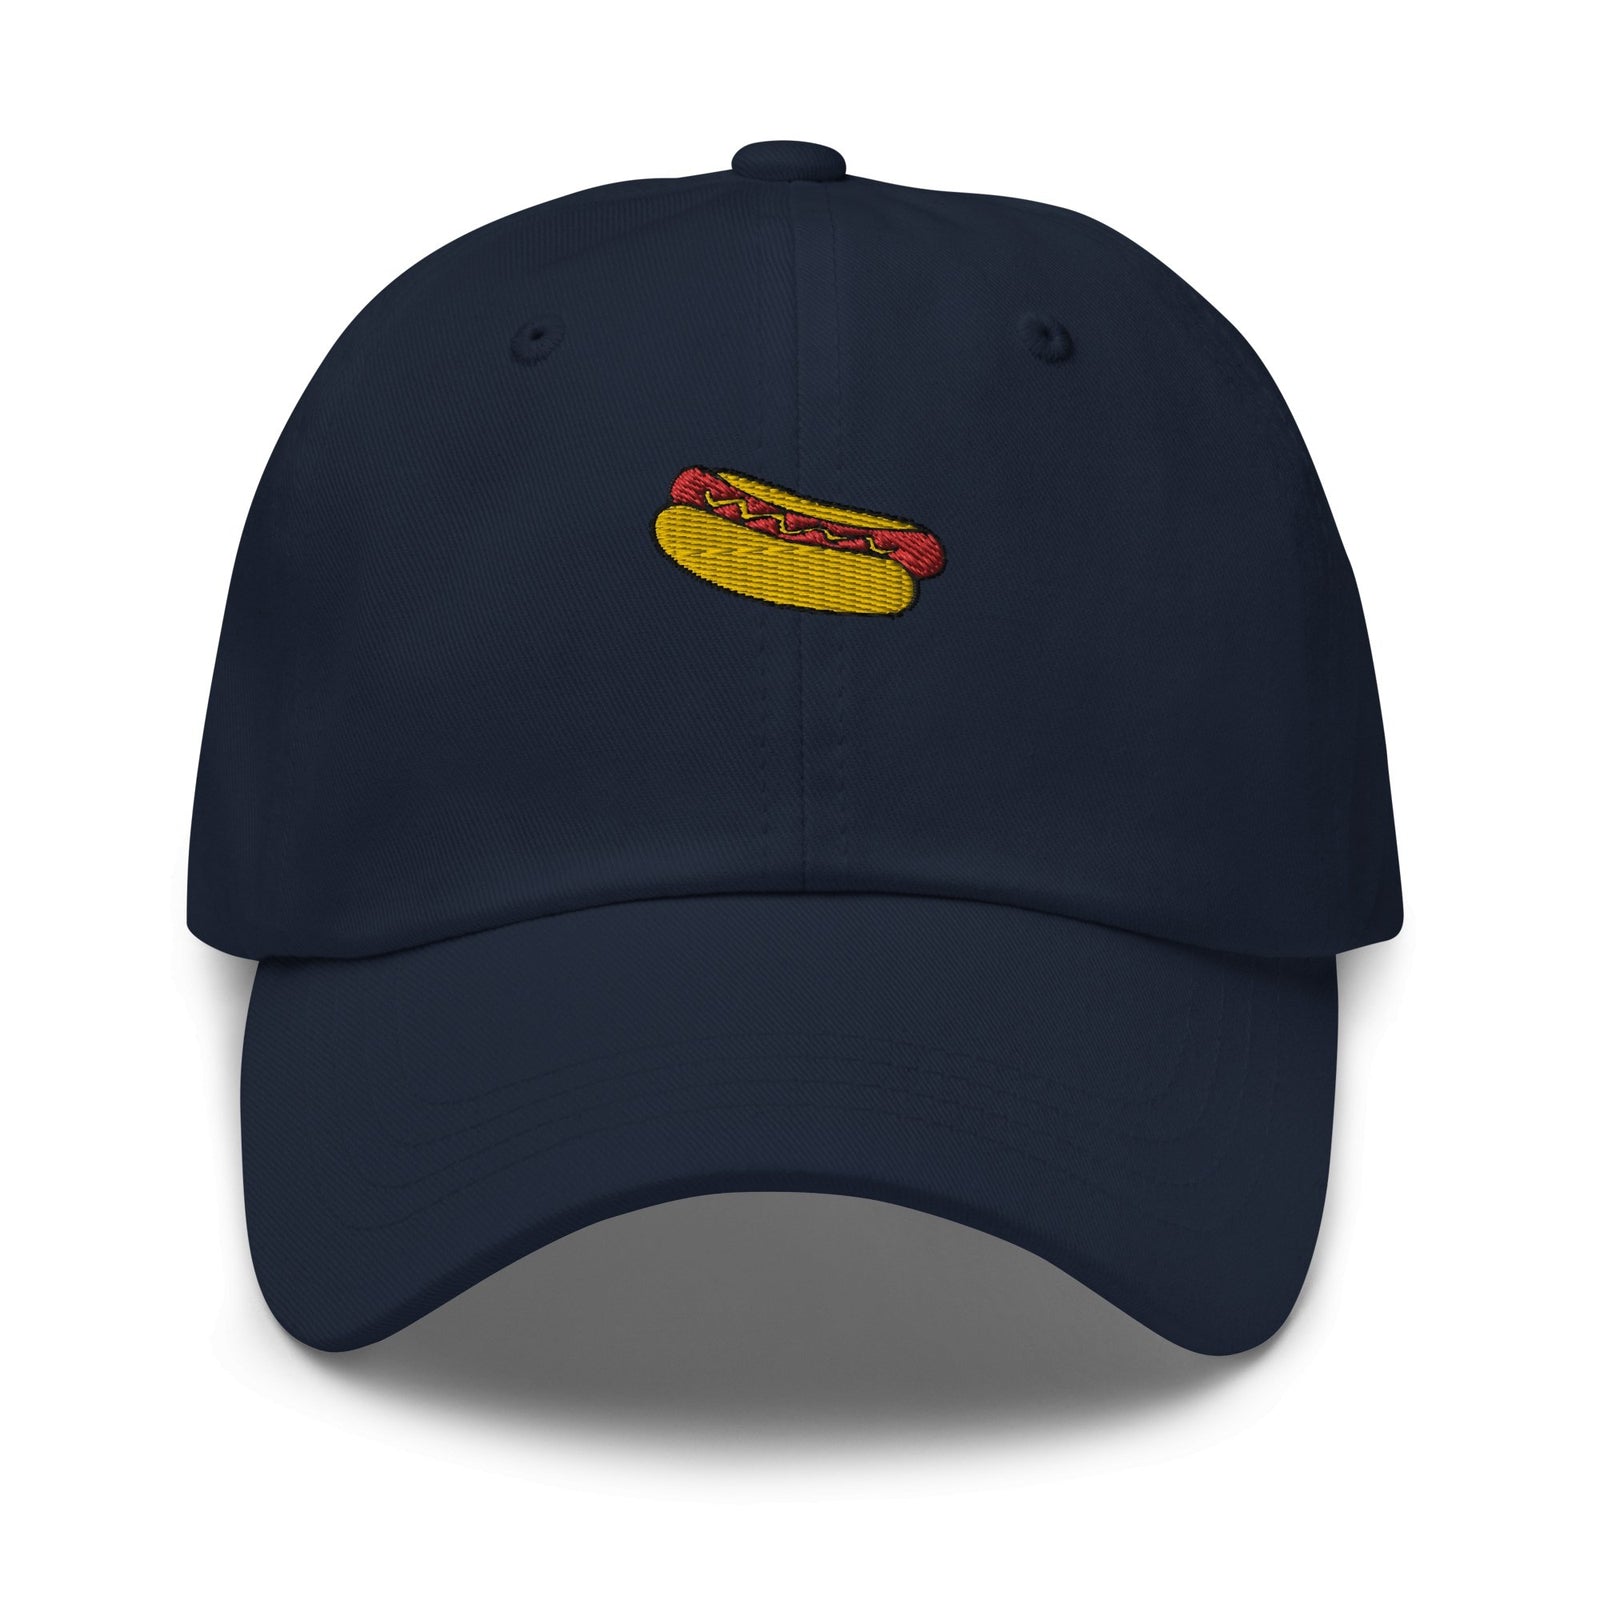 //cdn.shopify.com/s/files/1/0274/2488/2766/products/hot-dog-dad-hat-157934_5000x.jpg?v=1652422292 5000w,
    //cdn.shopify.com/s/files/1/0274/2488/2766/products/hot-dog-dad-hat-157934_4500x.jpg?v=1652422292 4500w,
    //cdn.shopify.com/s/files/1/0274/2488/2766/products/hot-dog-dad-hat-157934_4000x.jpg?v=1652422292 4000w,
    //cdn.shopify.com/s/files/1/0274/2488/2766/products/hot-dog-dad-hat-157934_3500x.jpg?v=1652422292 3500w,
    //cdn.shopify.com/s/files/1/0274/2488/2766/products/hot-dog-dad-hat-157934_3000x.jpg?v=1652422292 3000w,
    //cdn.shopify.com/s/files/1/0274/2488/2766/products/hot-dog-dad-hat-157934_2500x.jpg?v=1652422292 2500w,
    //cdn.shopify.com/s/files/1/0274/2488/2766/products/hot-dog-dad-hat-157934_2000x.jpg?v=1652422292 2000w,
    //cdn.shopify.com/s/files/1/0274/2488/2766/products/hot-dog-dad-hat-157934_1800x.jpg?v=1652422292 1800w,
    //cdn.shopify.com/s/files/1/0274/2488/2766/products/hot-dog-dad-hat-157934_1600x.jpg?v=1652422292 1600w,
    //cdn.shopify.com/s/files/1/0274/2488/2766/products/hot-dog-dad-hat-157934_1400x.jpg?v=1652422292 1400w,
    //cdn.shopify.com/s/files/1/0274/2488/2766/products/hot-dog-dad-hat-157934_1200x.jpg?v=1652422292 1200w,
    //cdn.shopify.com/s/files/1/0274/2488/2766/products/hot-dog-dad-hat-157934_1000x.jpg?v=1652422292 1000w,
    //cdn.shopify.com/s/files/1/0274/2488/2766/products/hot-dog-dad-hat-157934_800x.jpg?v=1652422292 800w,
    //cdn.shopify.com/s/files/1/0274/2488/2766/products/hot-dog-dad-hat-157934_600x.jpg?v=1652422292 600w,
    //cdn.shopify.com/s/files/1/0274/2488/2766/products/hot-dog-dad-hat-157934_400x.jpg?v=1652422292 400w,
    //cdn.shopify.com/s/files/1/0274/2488/2766/products/hot-dog-dad-hat-157934_200x.jpg?v=1652422292 200w